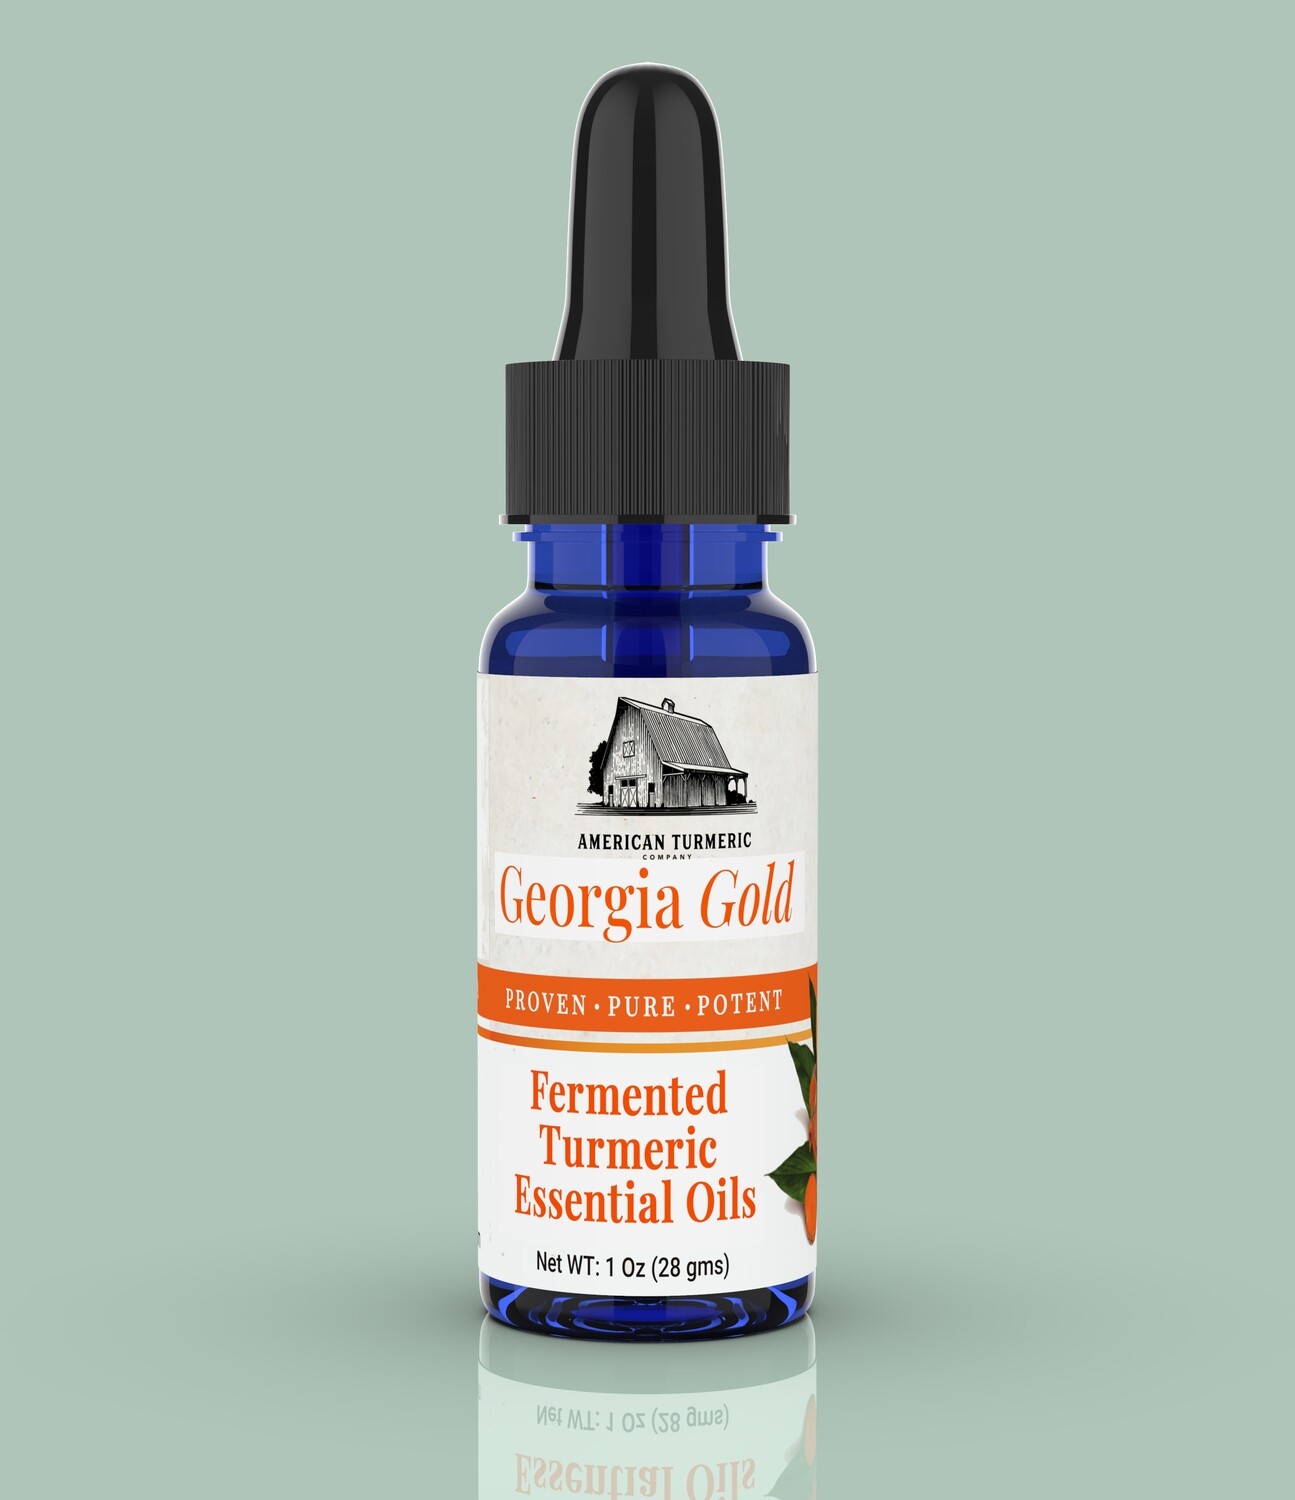 Fermented Turmeric Oil - Concentrated Turmeric Goodness in Easy to Use Form